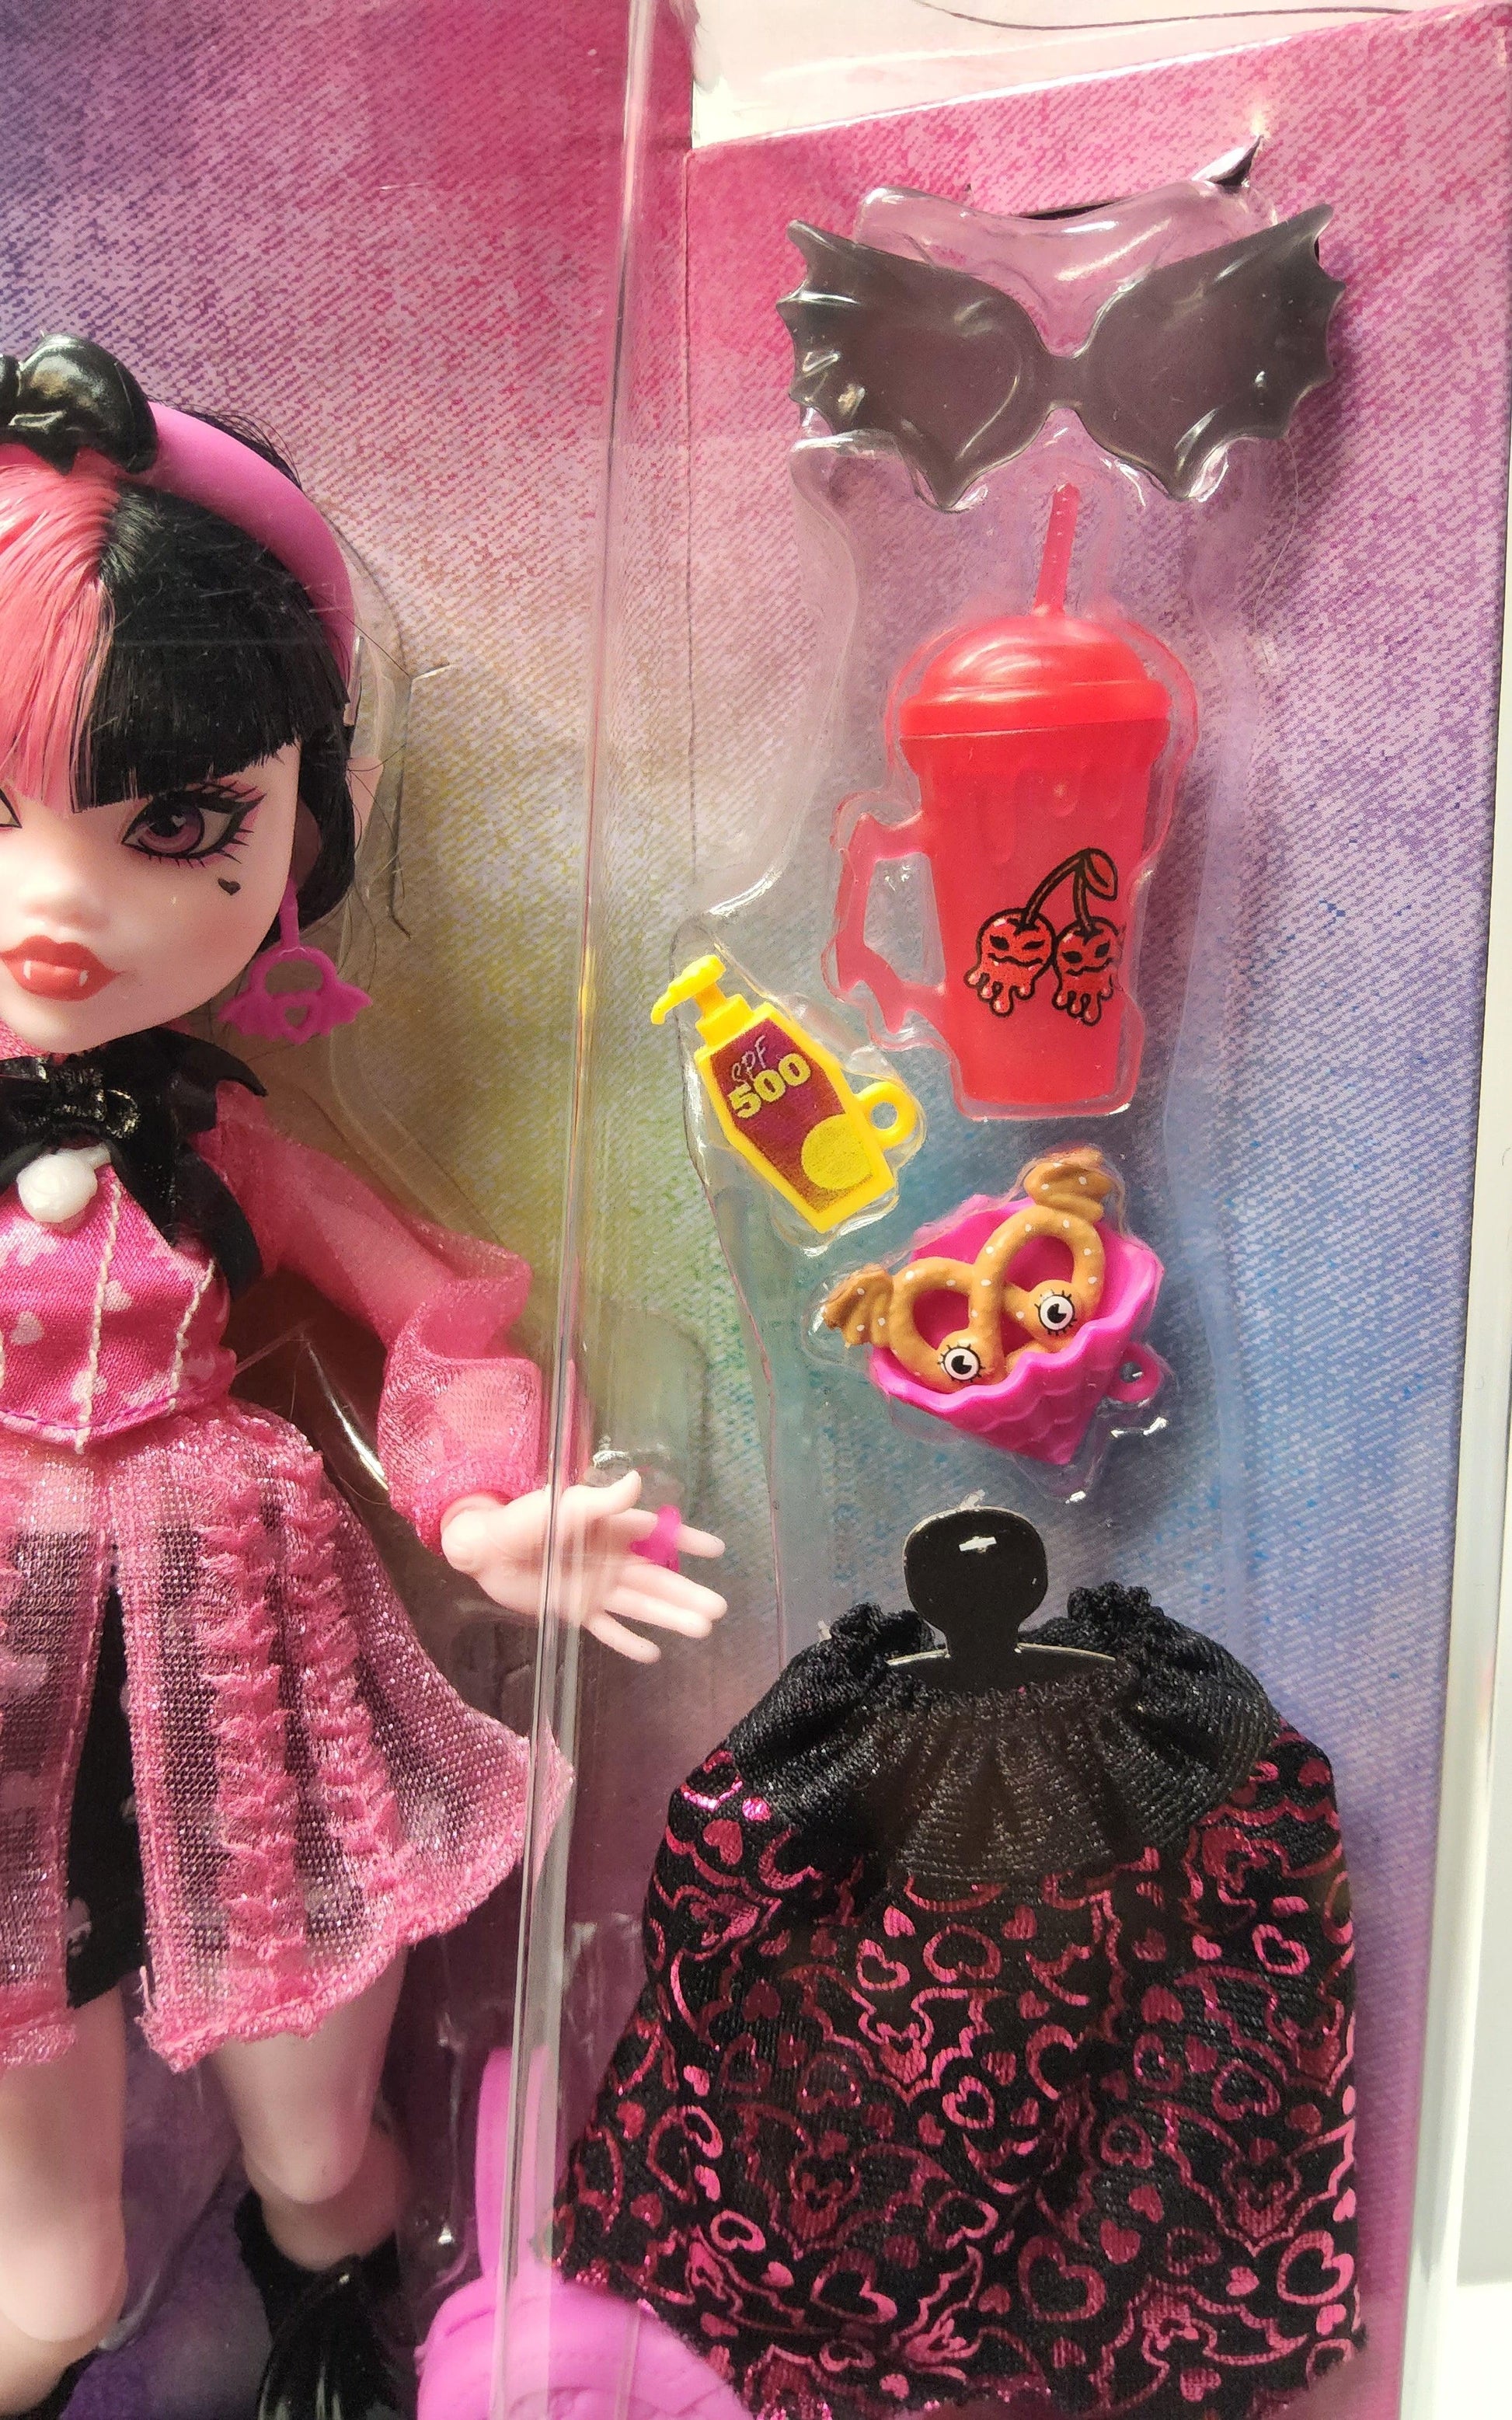 Monster High Deuce Gorgon Doll With Pet And Accessories